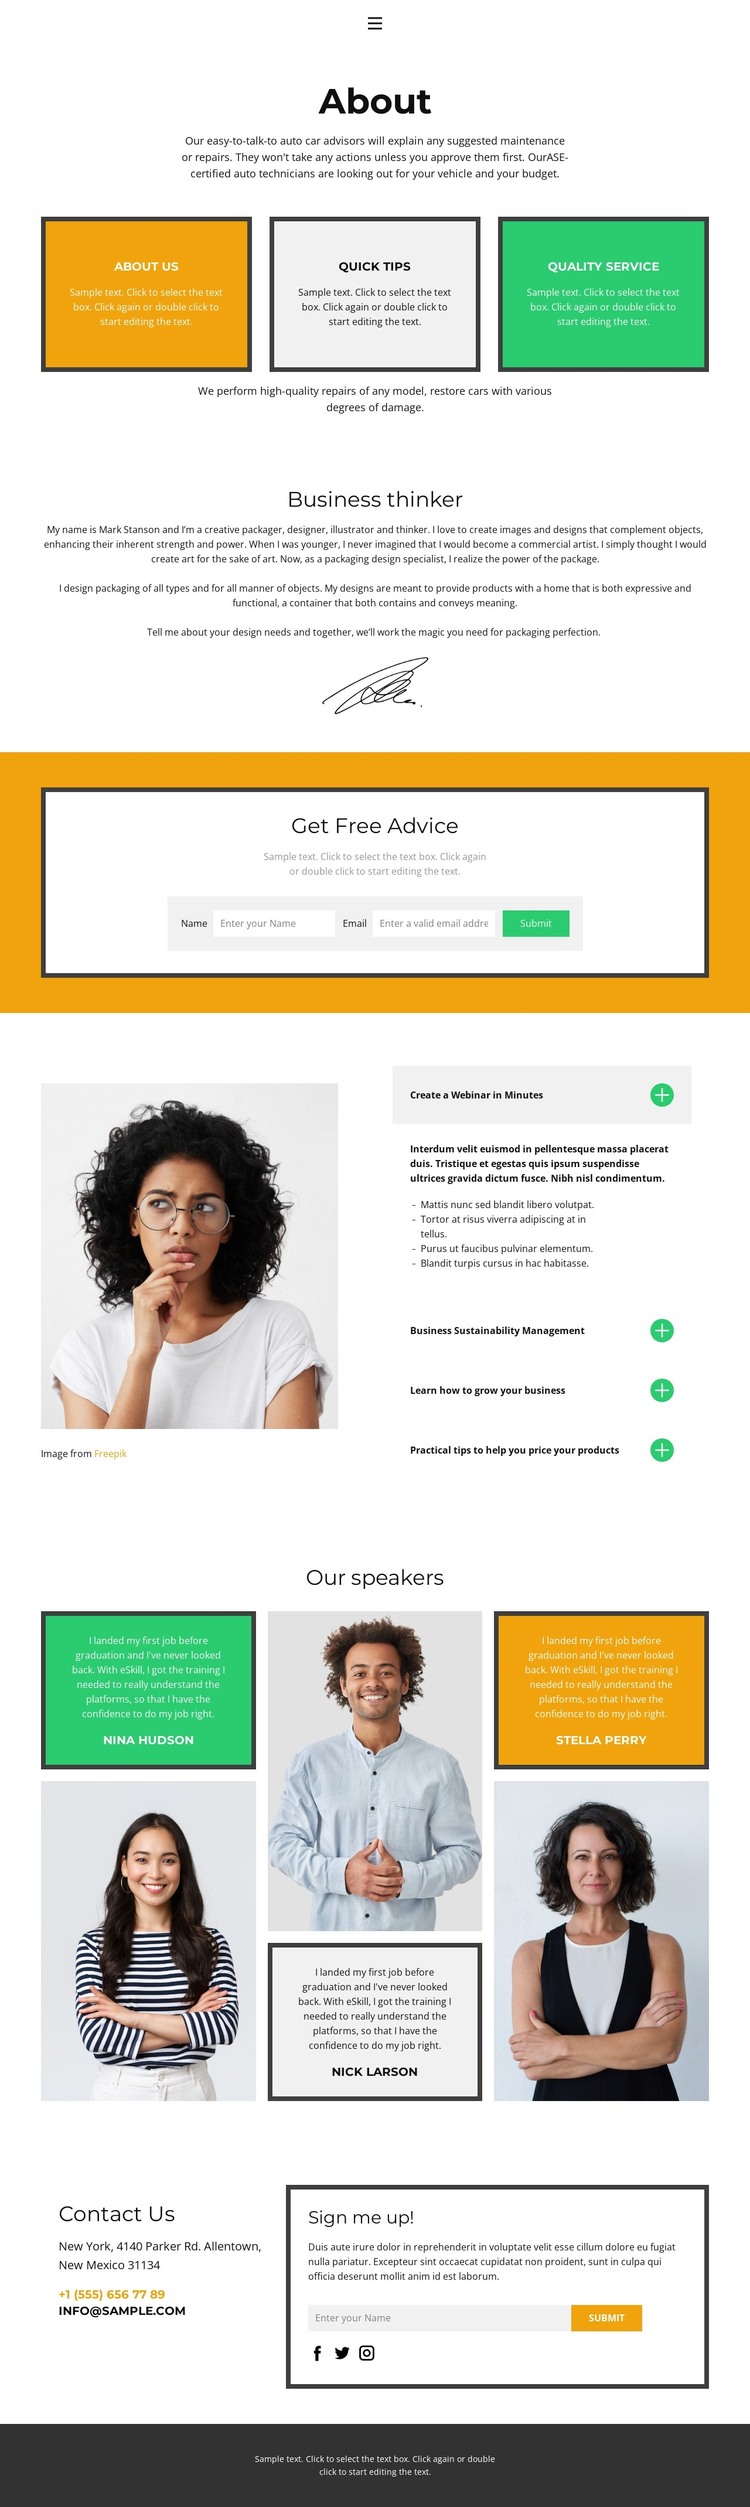 Read and find answers WordPress Theme